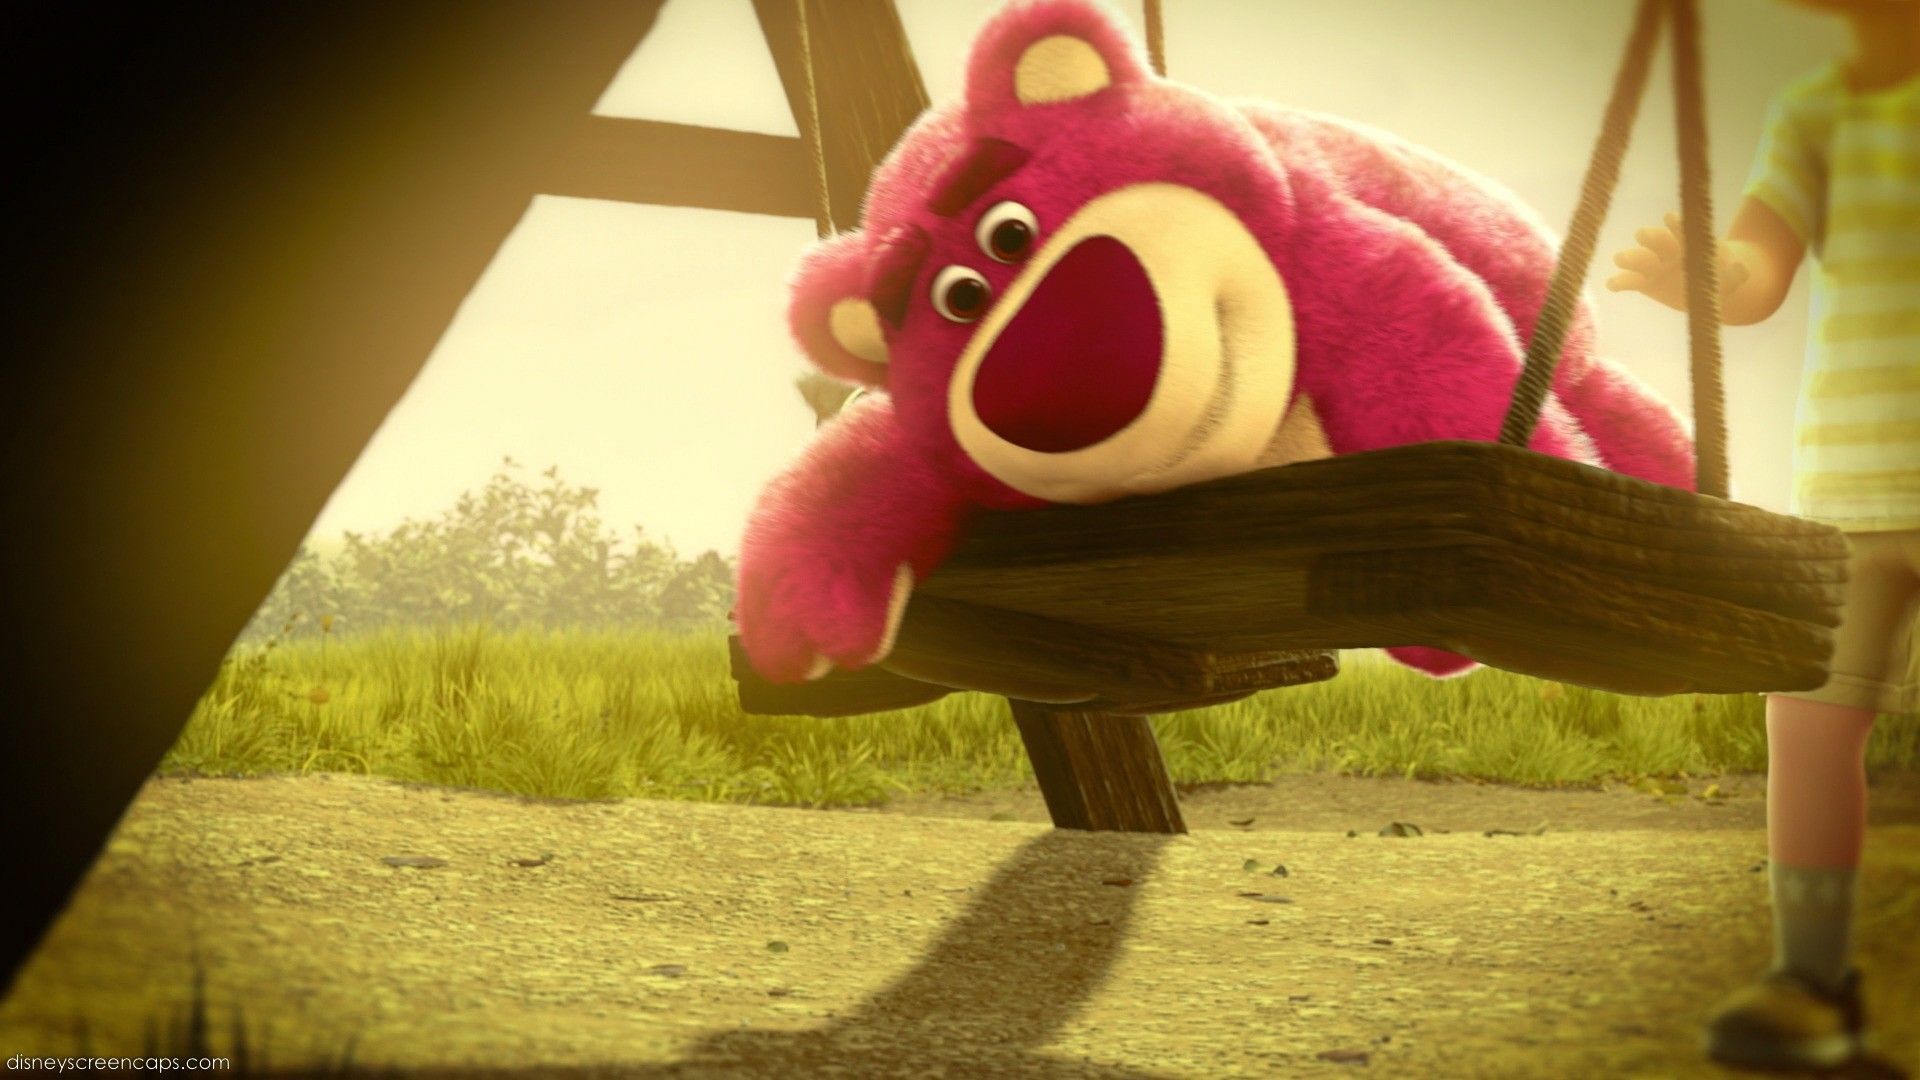 Best Lotso! image. Toy story Toy story, Toy story party